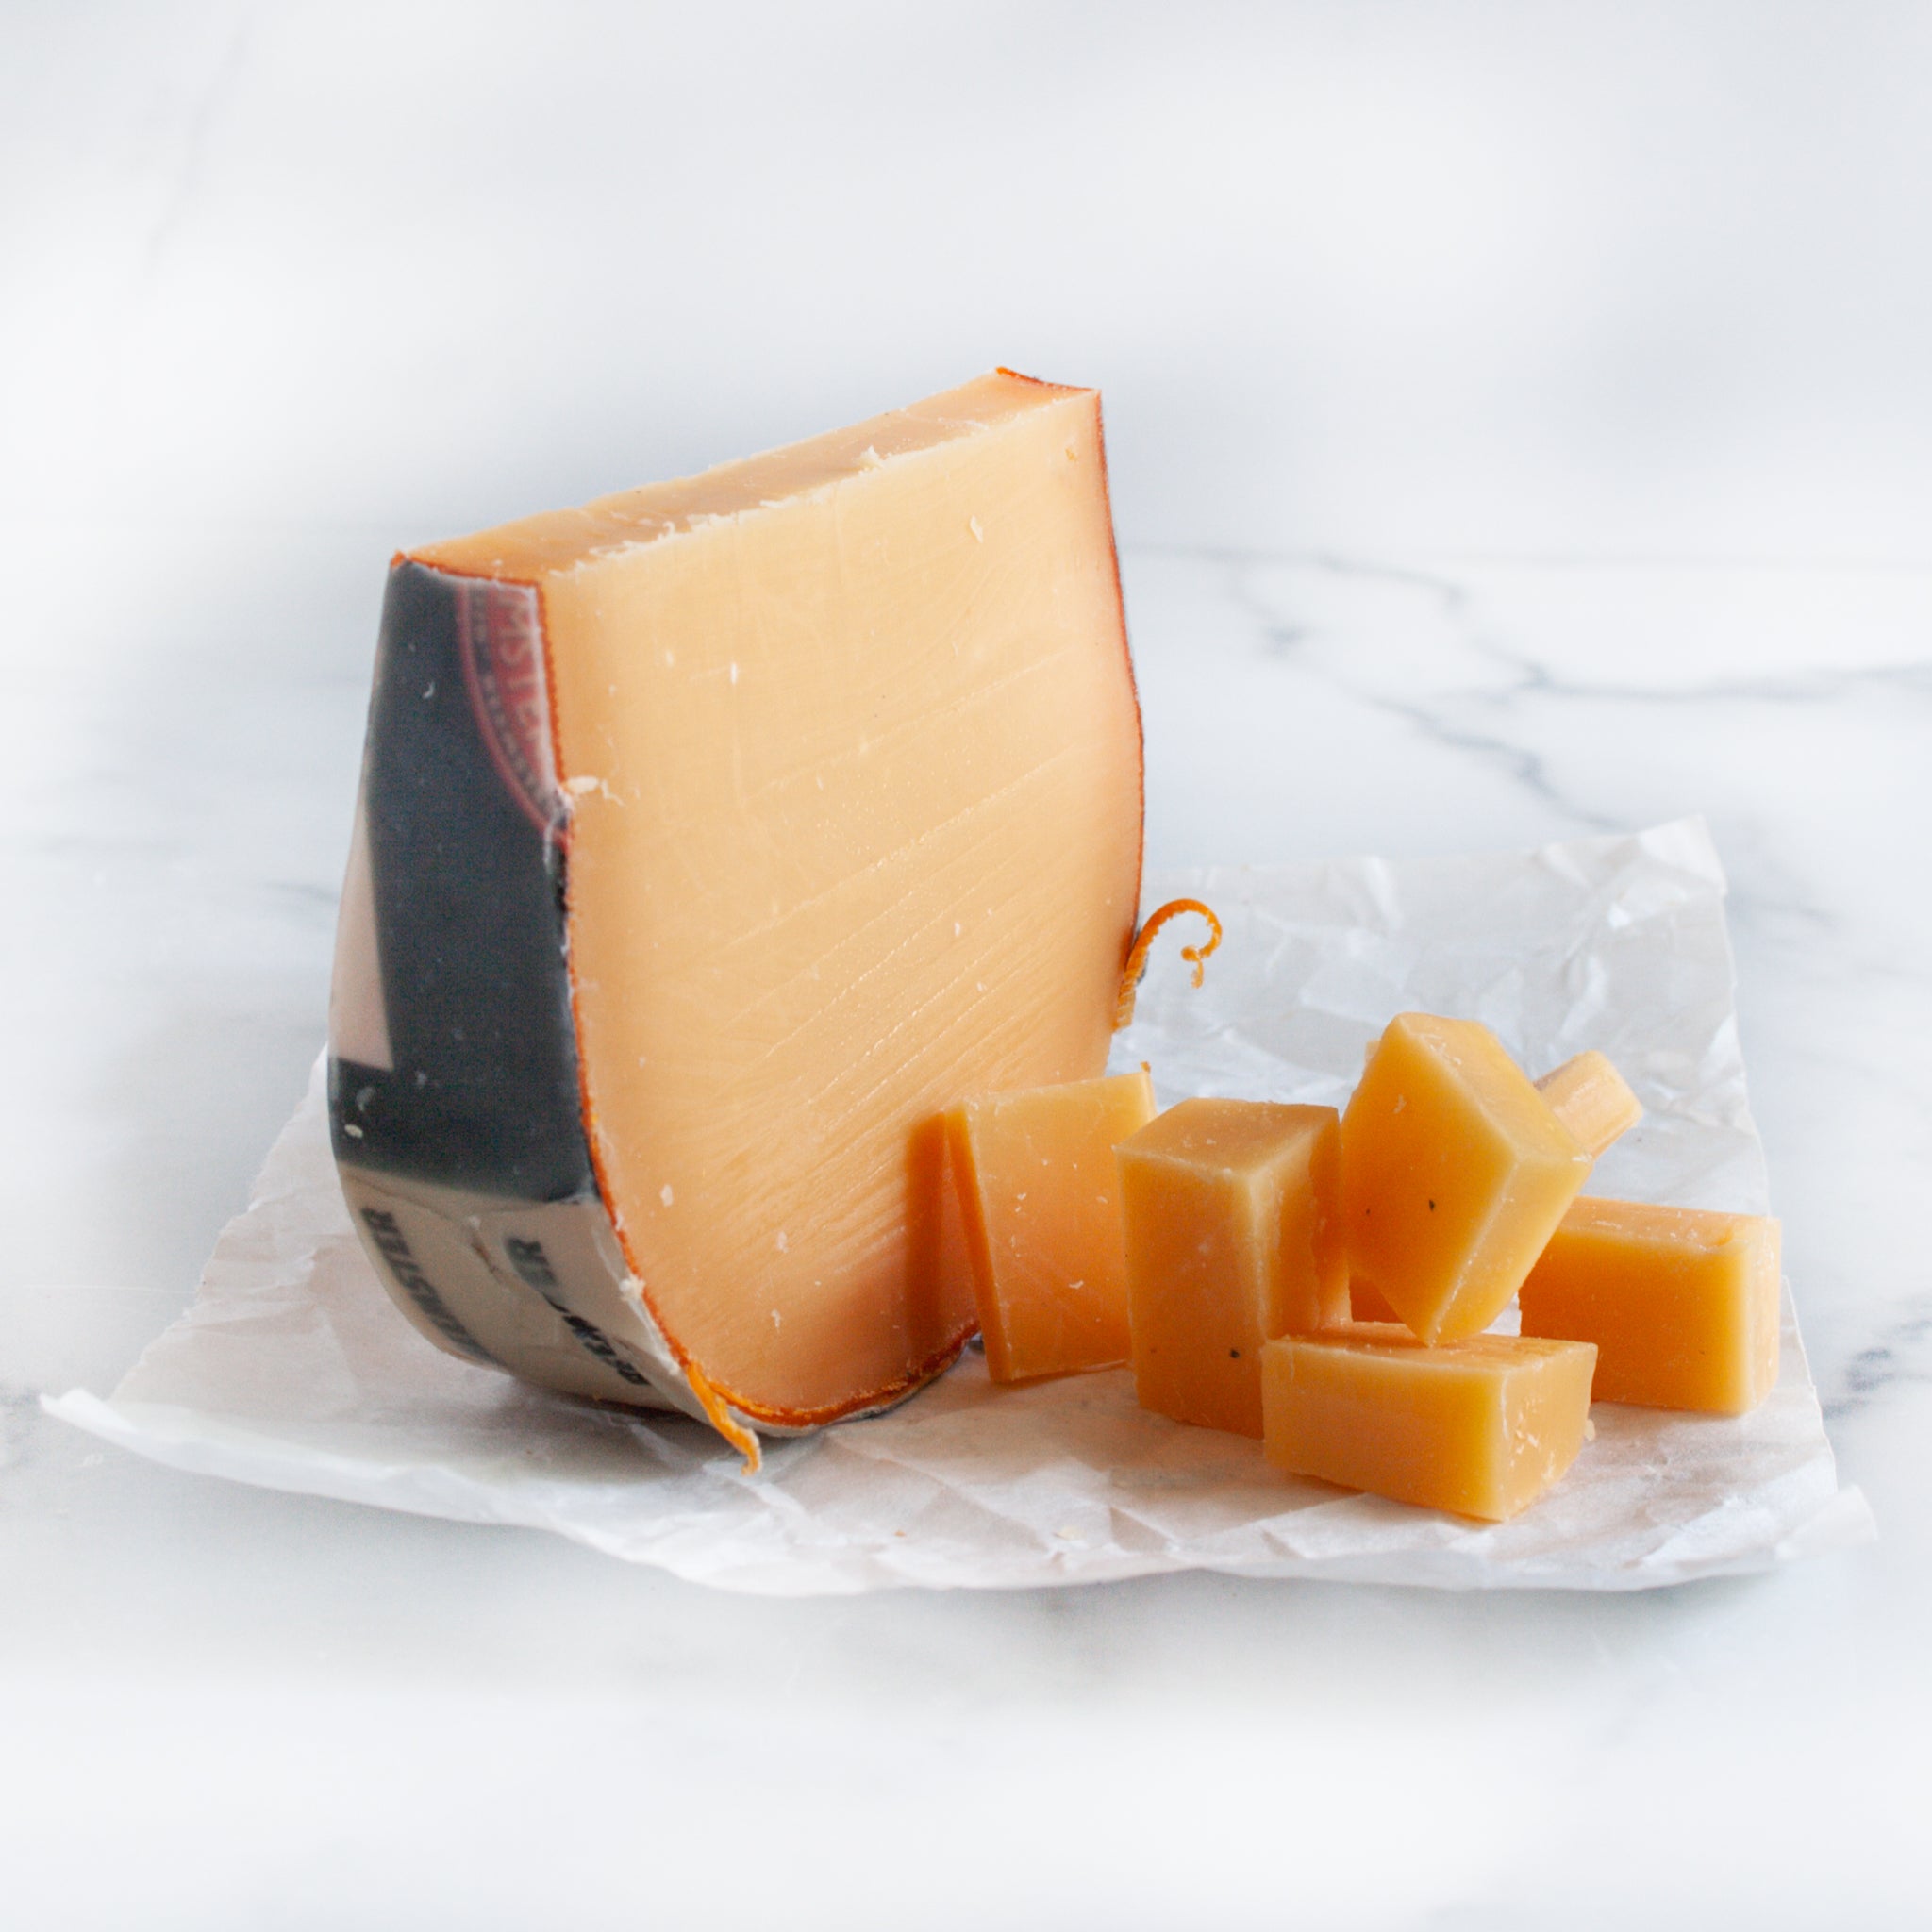 Beemster Classic 18 Month Aged Gouda Cheese - igourmet